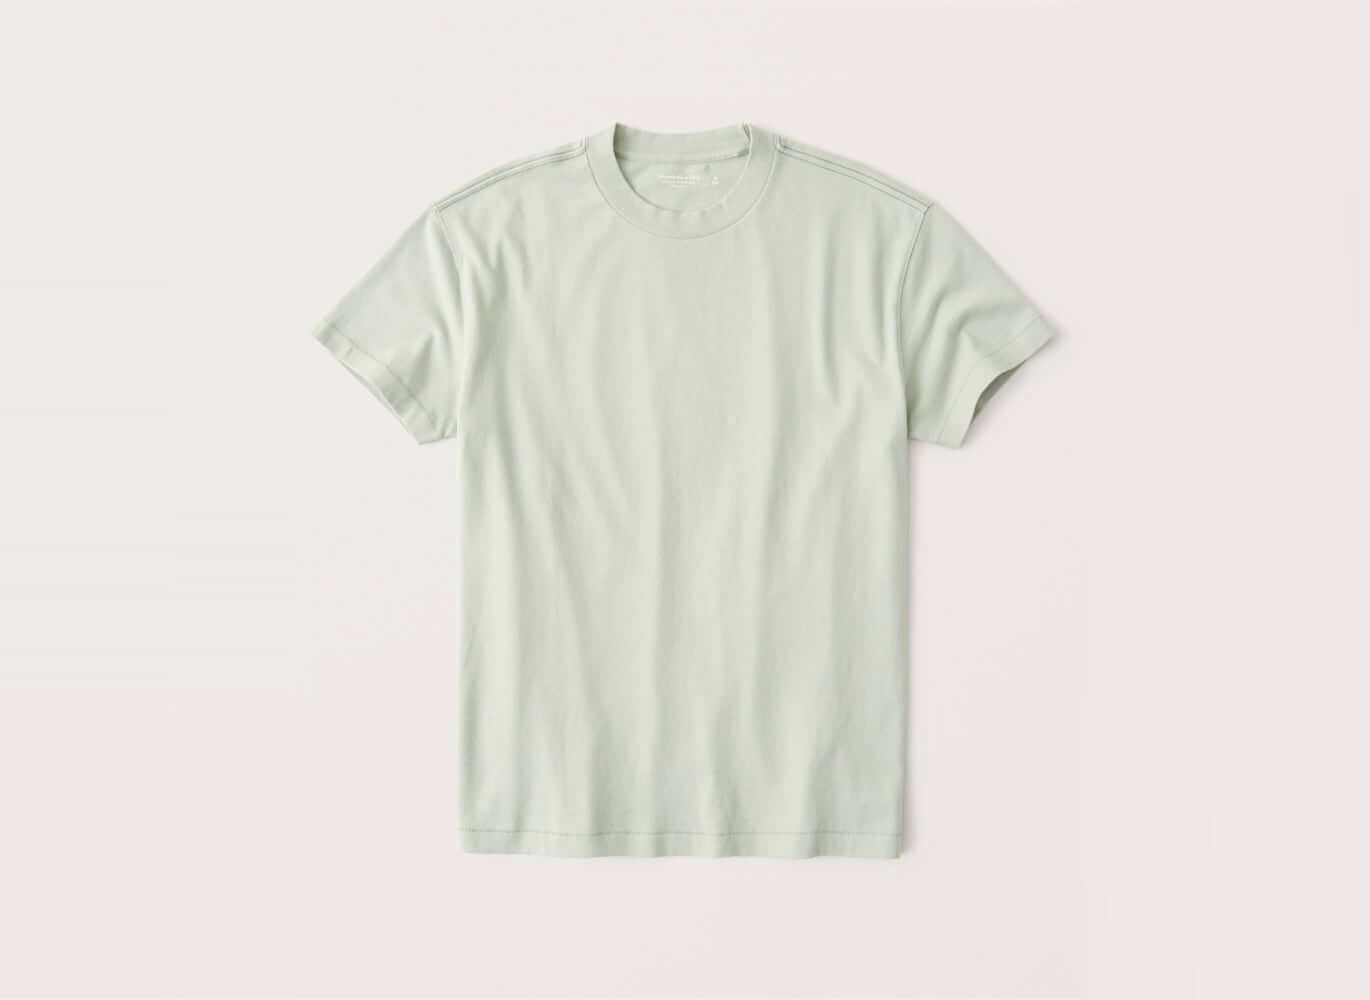 Abercrombie & Fitch Relaxed Crew T-Shirt